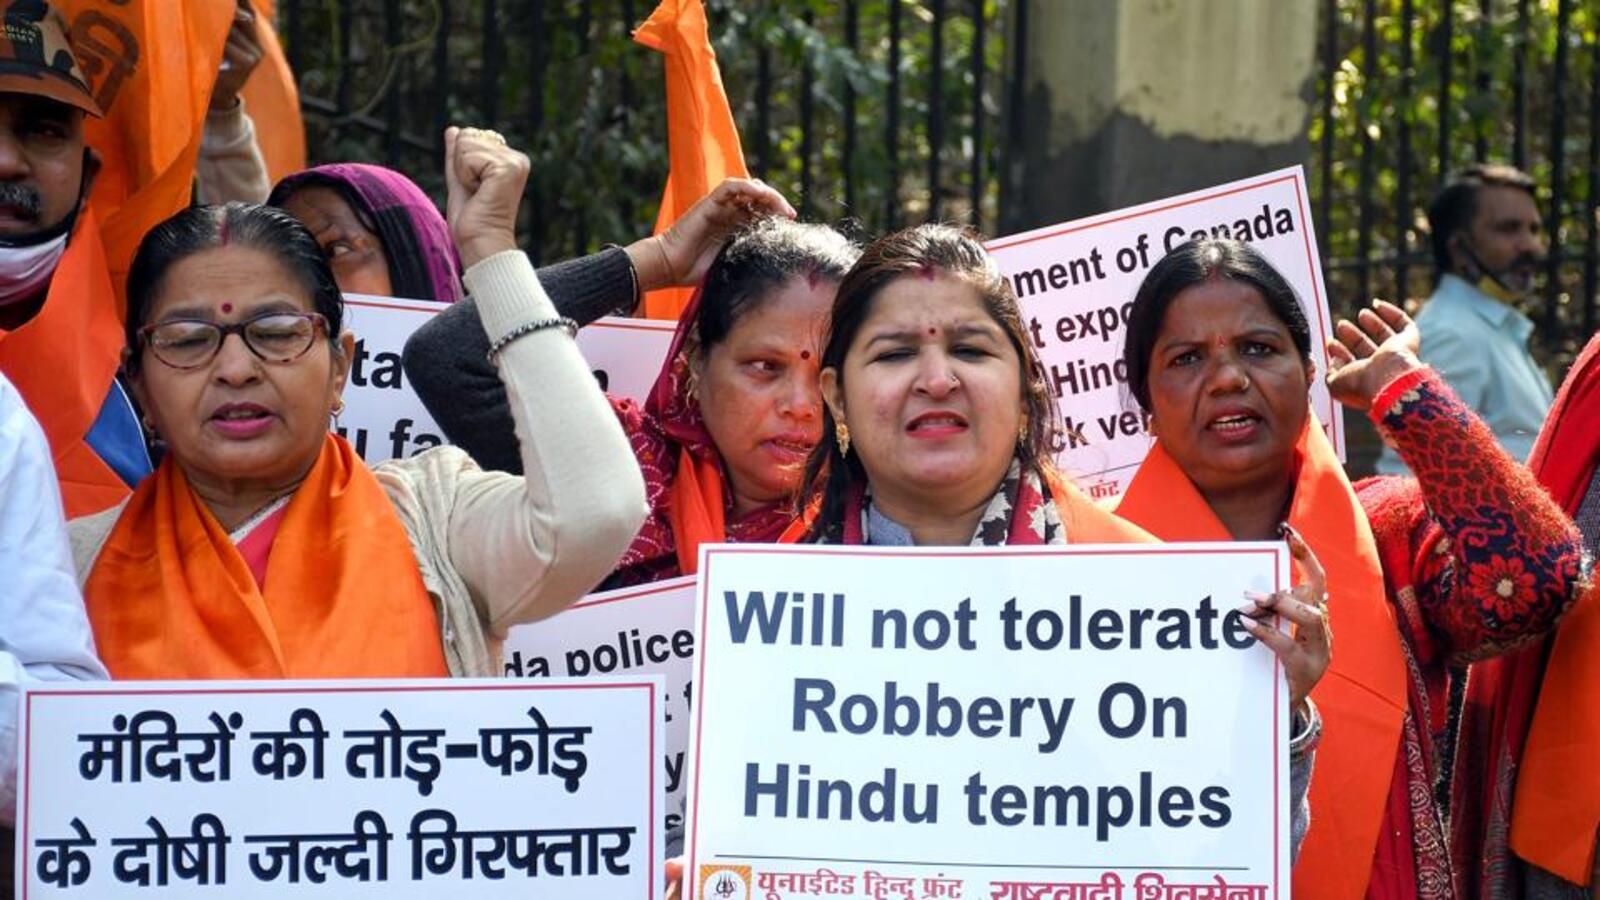 Hindu community in Canada concerned as two more temple breakins